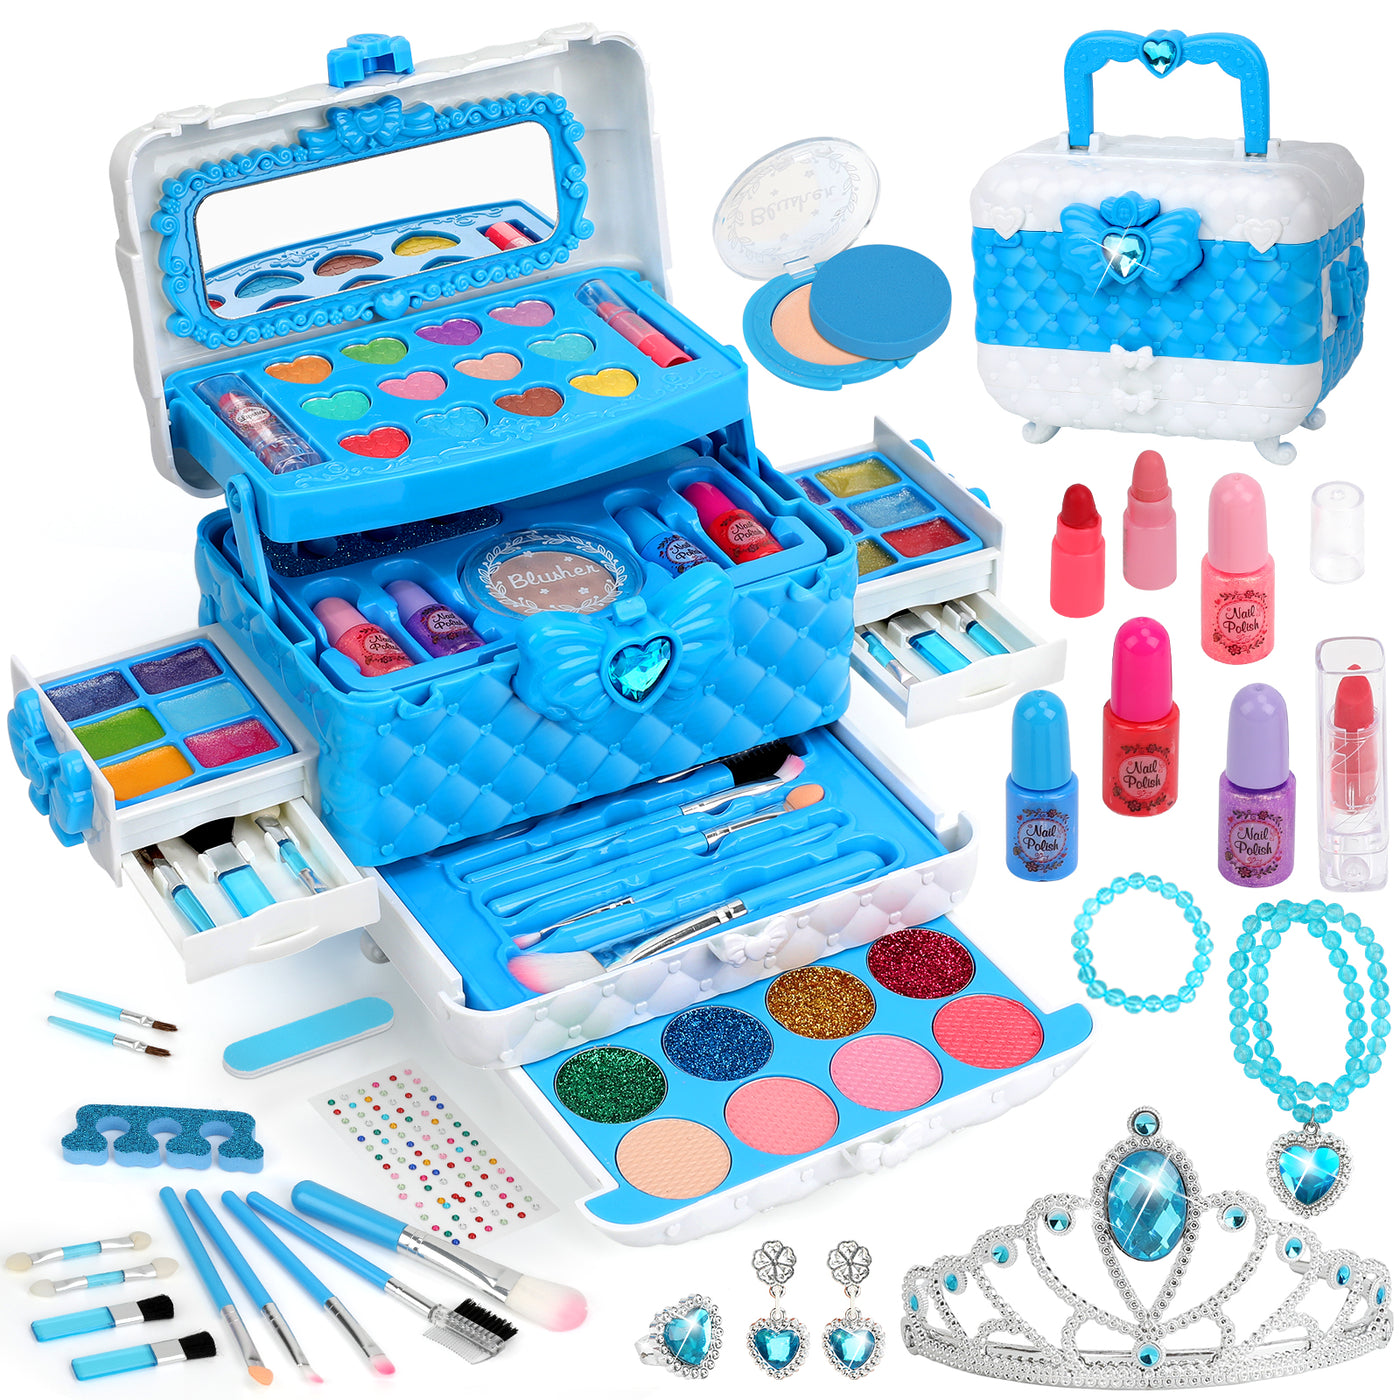  Flybay Kids Makeup Kit for Girl, Washable Kids Makeup Toys for  Girls, Real Little Girls Makeup Kit for Kids 4-6, Princess Pretend Play  Makeup Toy Set, Birthday Gift Girl Toys Age